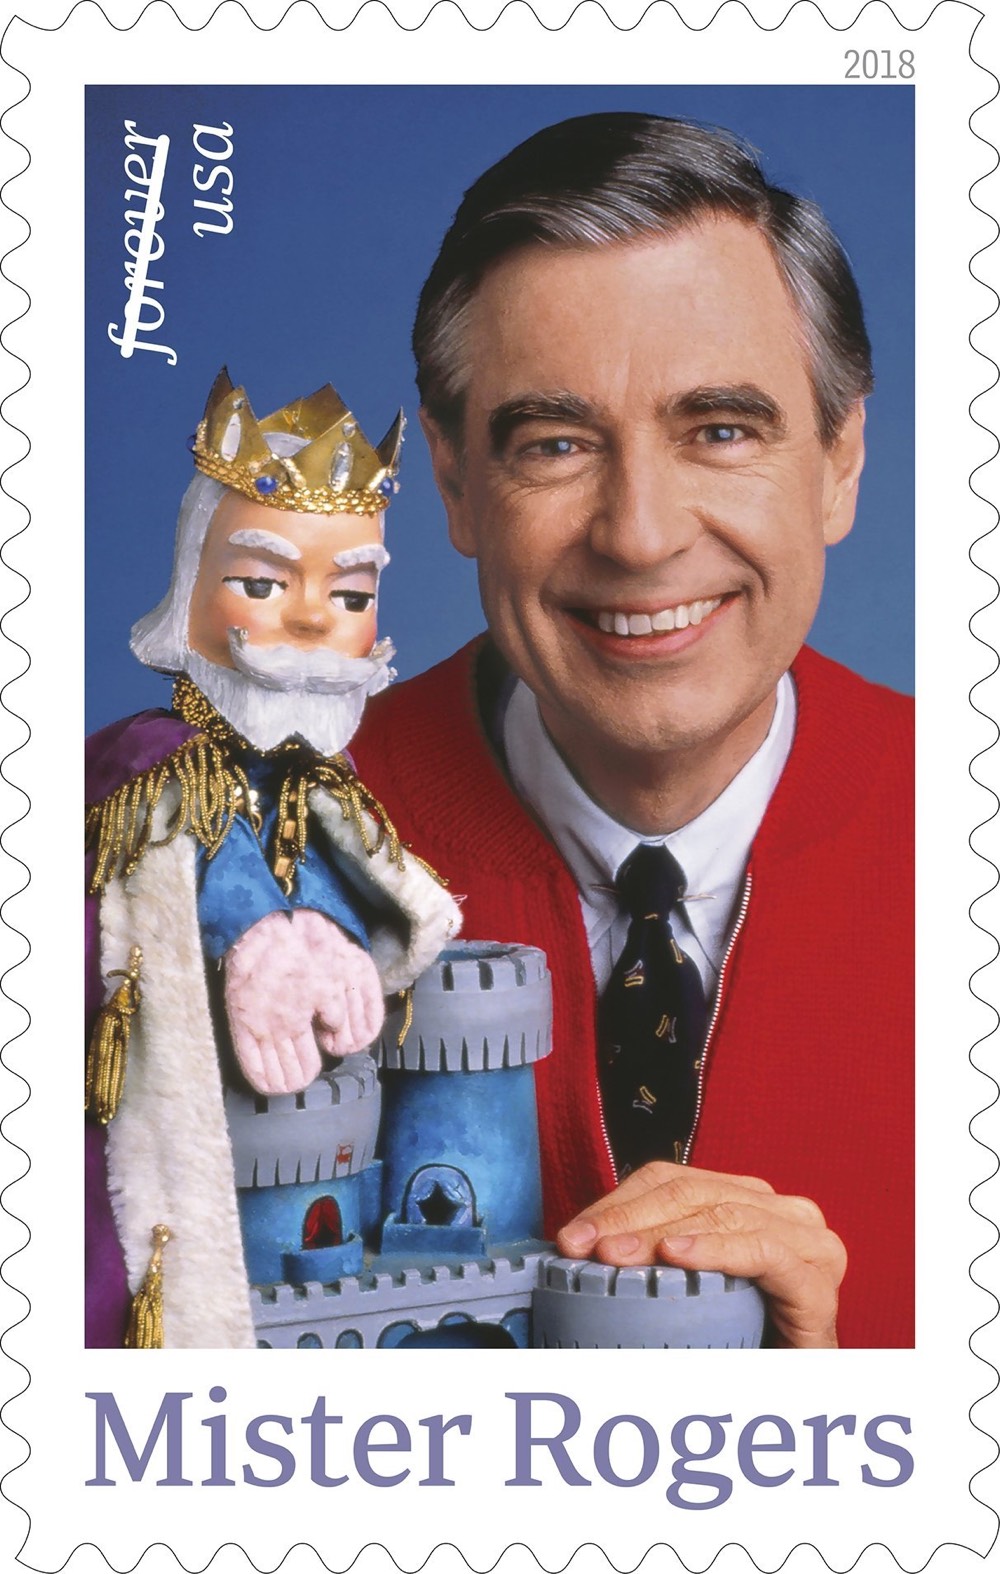 Mr. Rogers gets a stamp